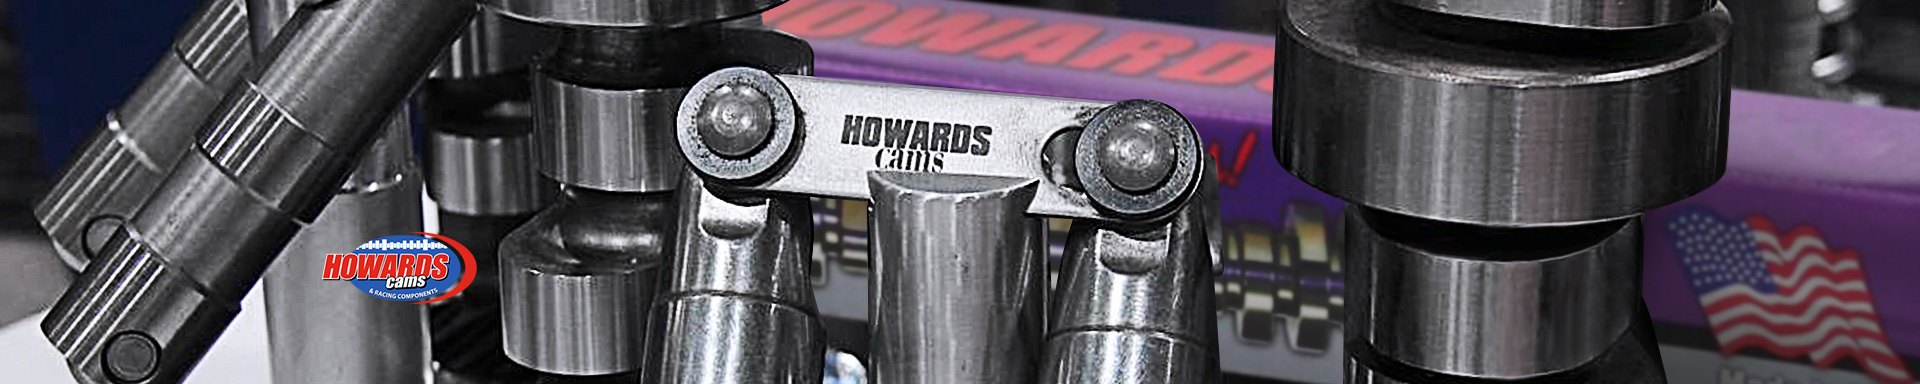 Howards Cams Engine Service Tools